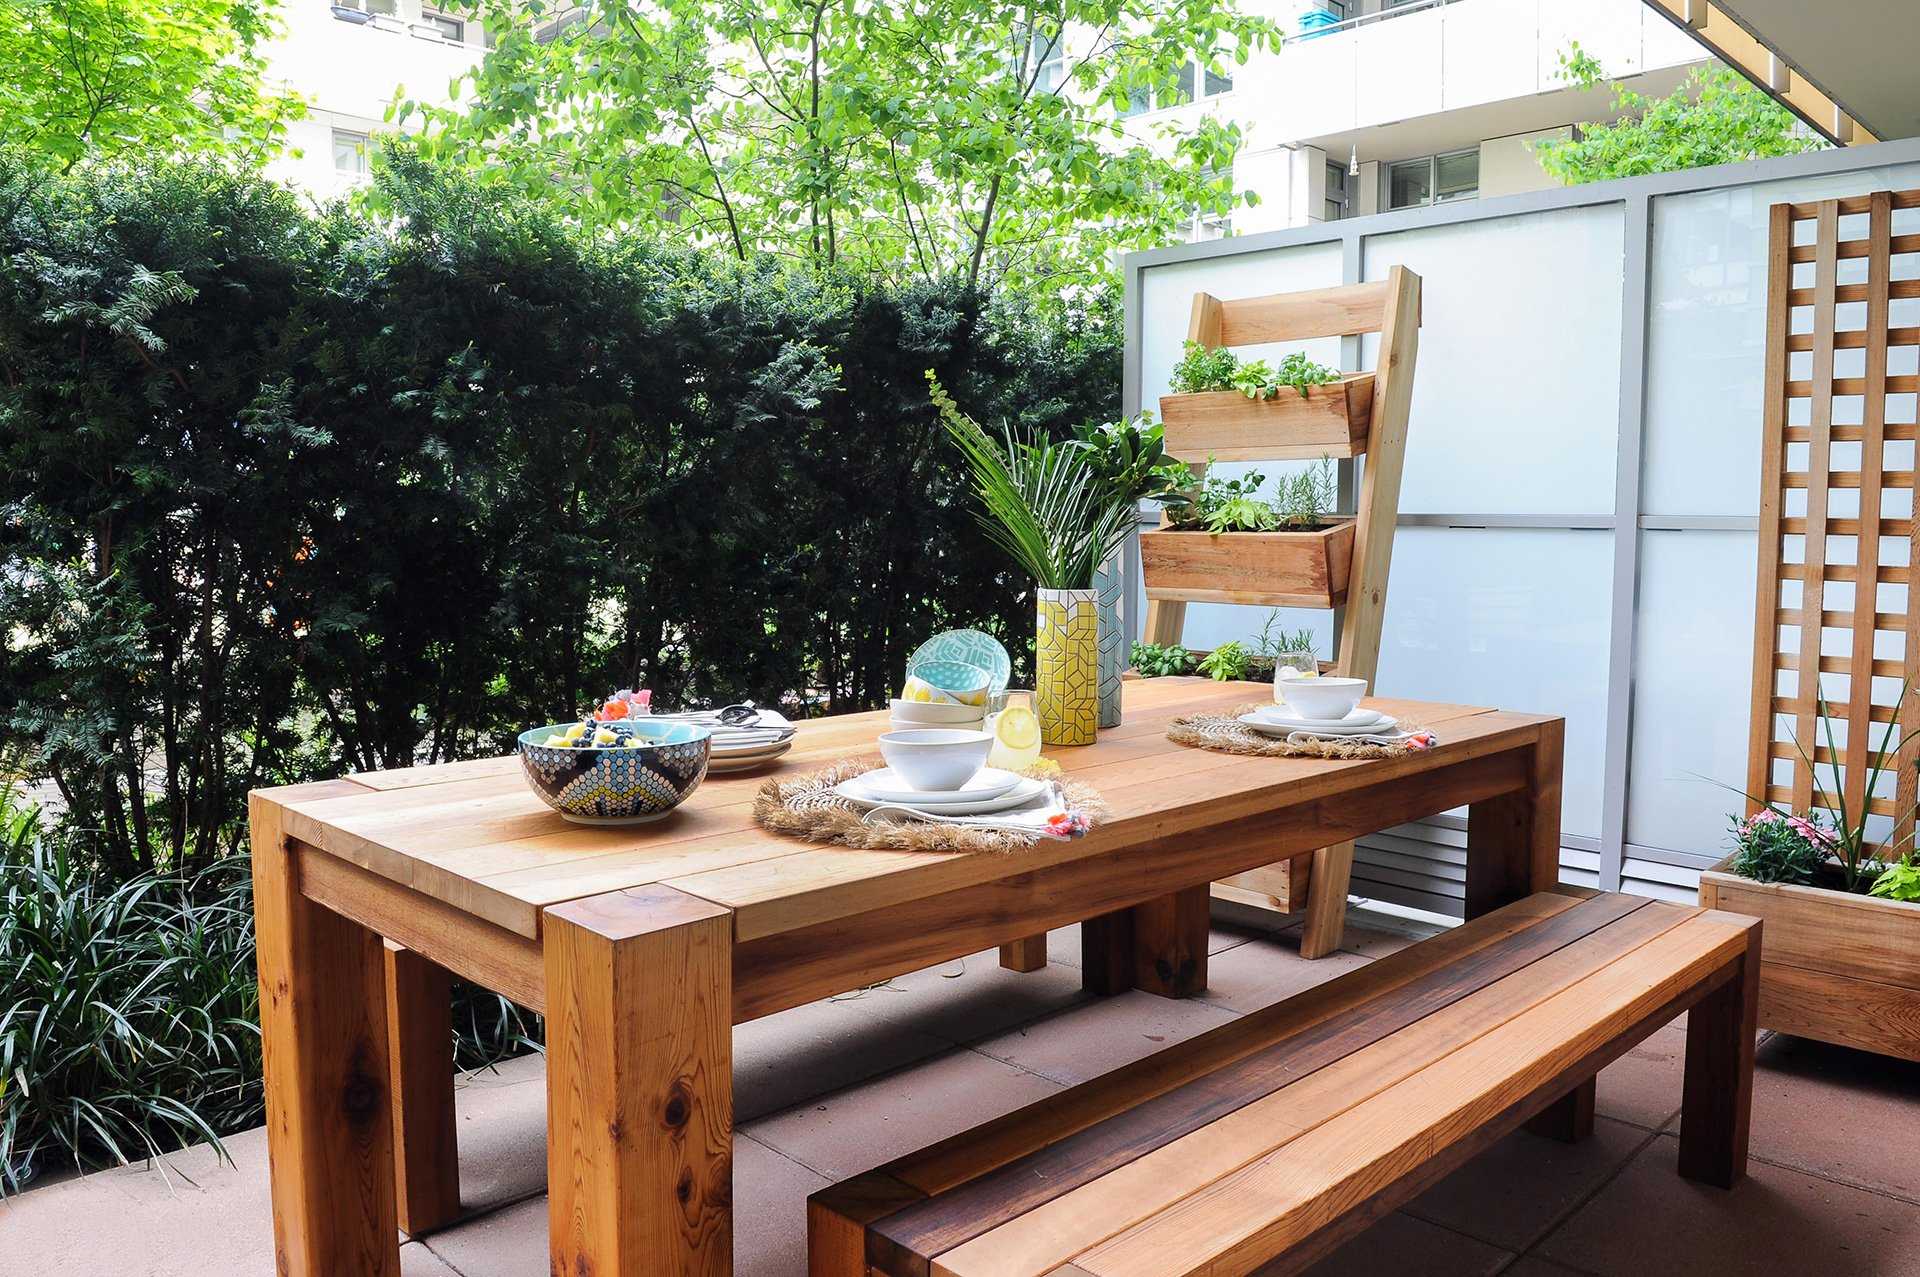 A wooden table and chairs on a balcony, the best outdoor furniture.